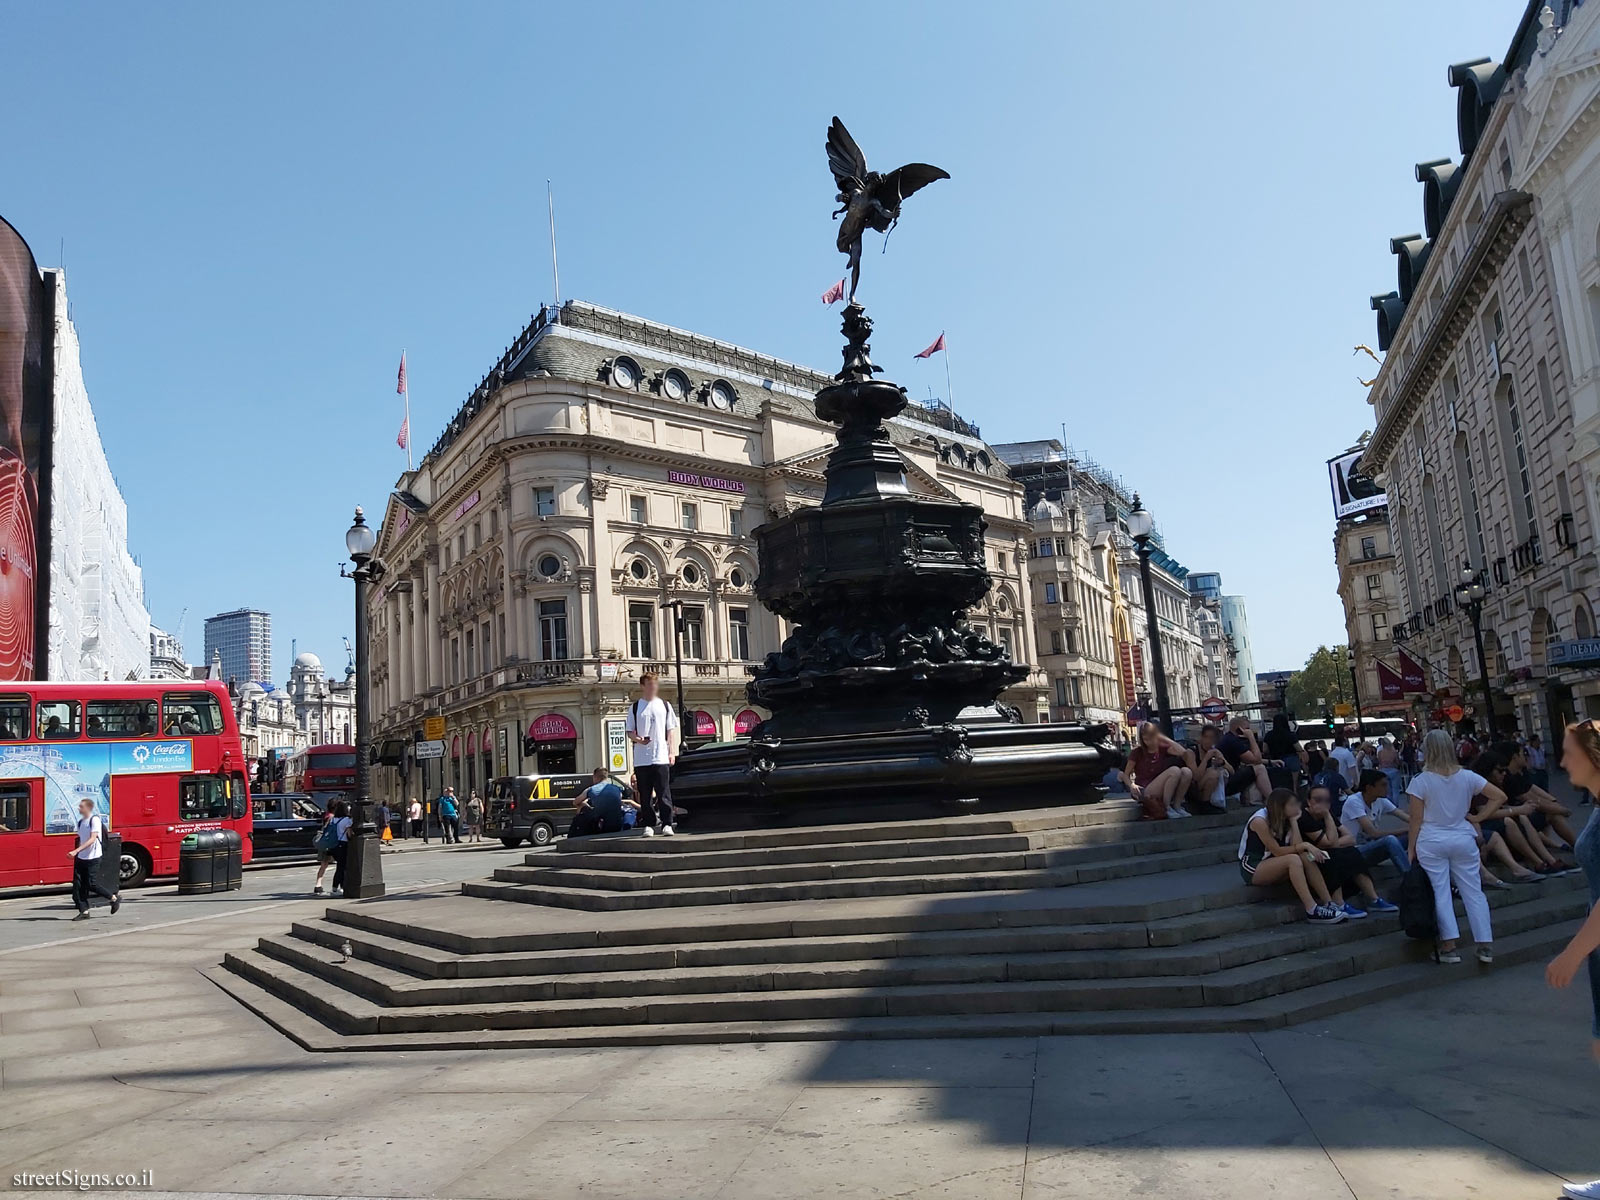 London - Piccadilly Circus - Lord Shaftesbury’s Memorial Fountain